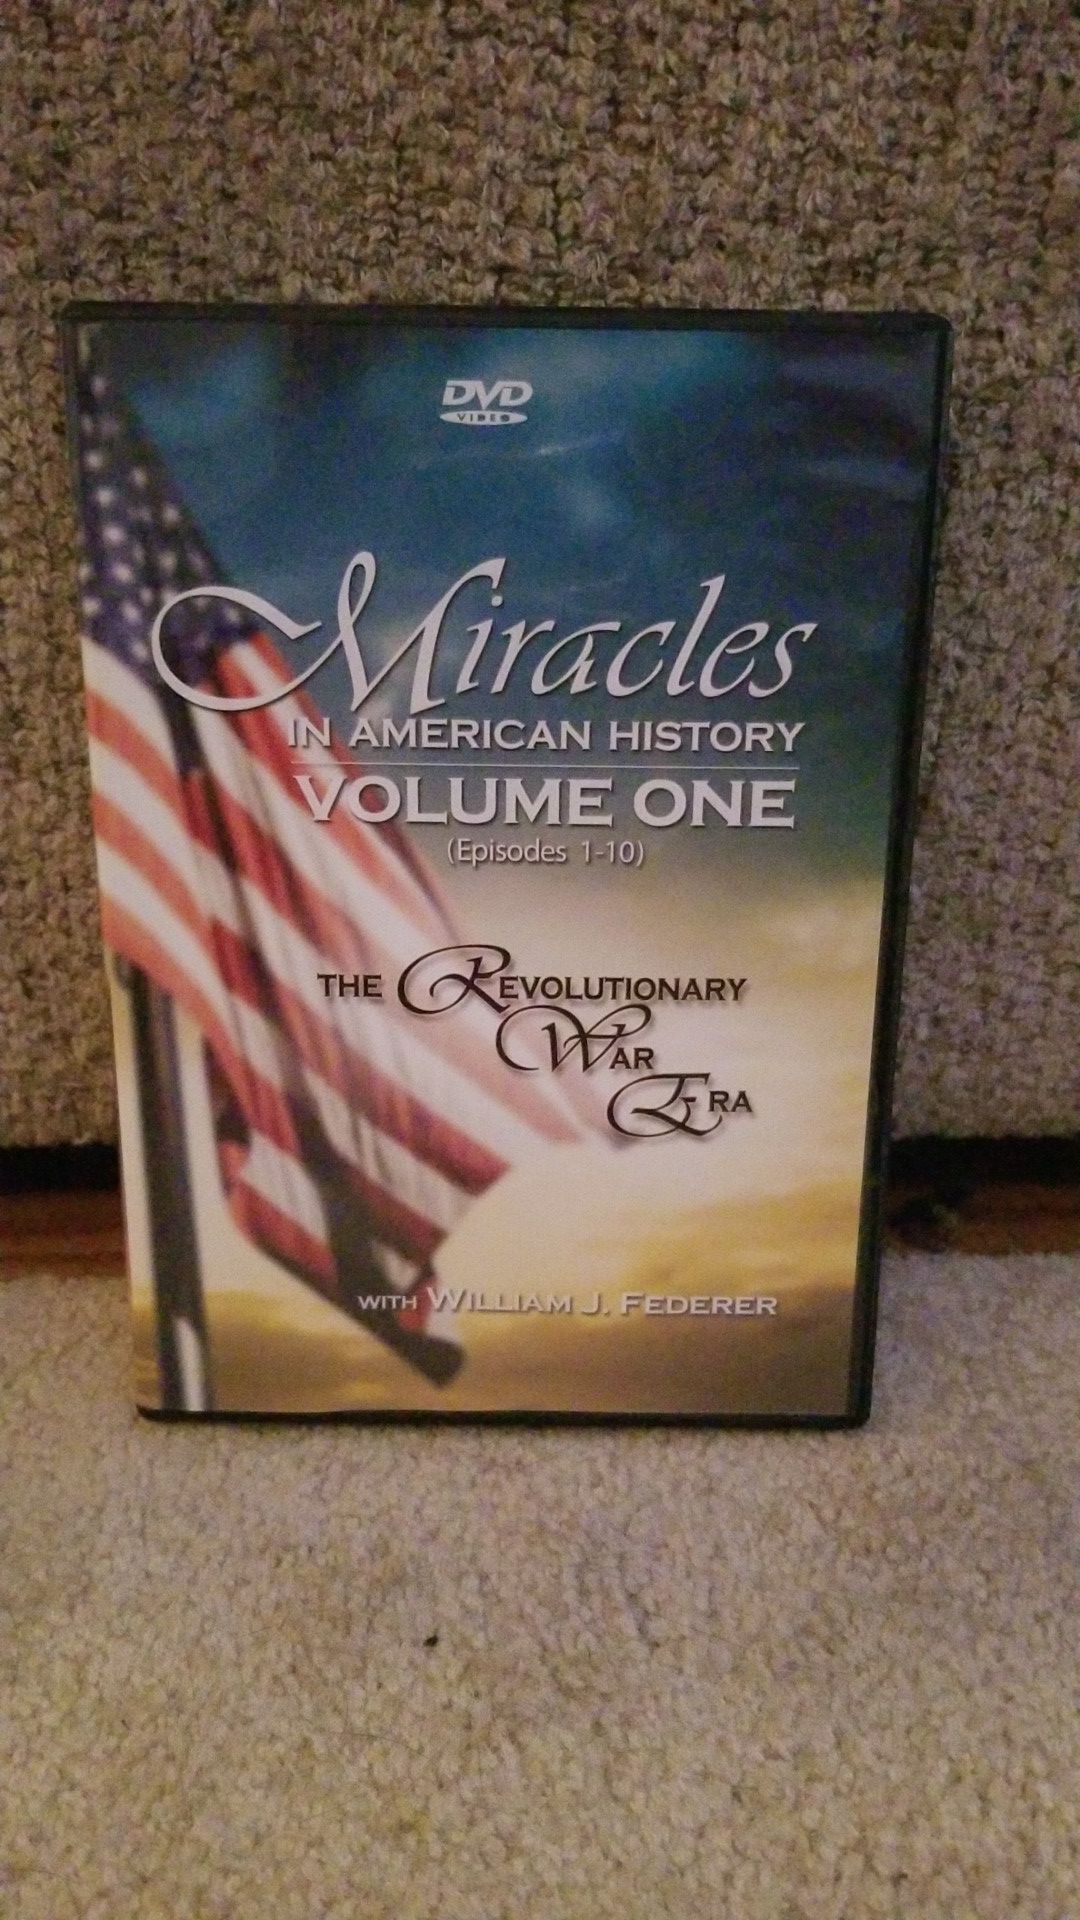 Miracles in American History Vol. 1 DVD